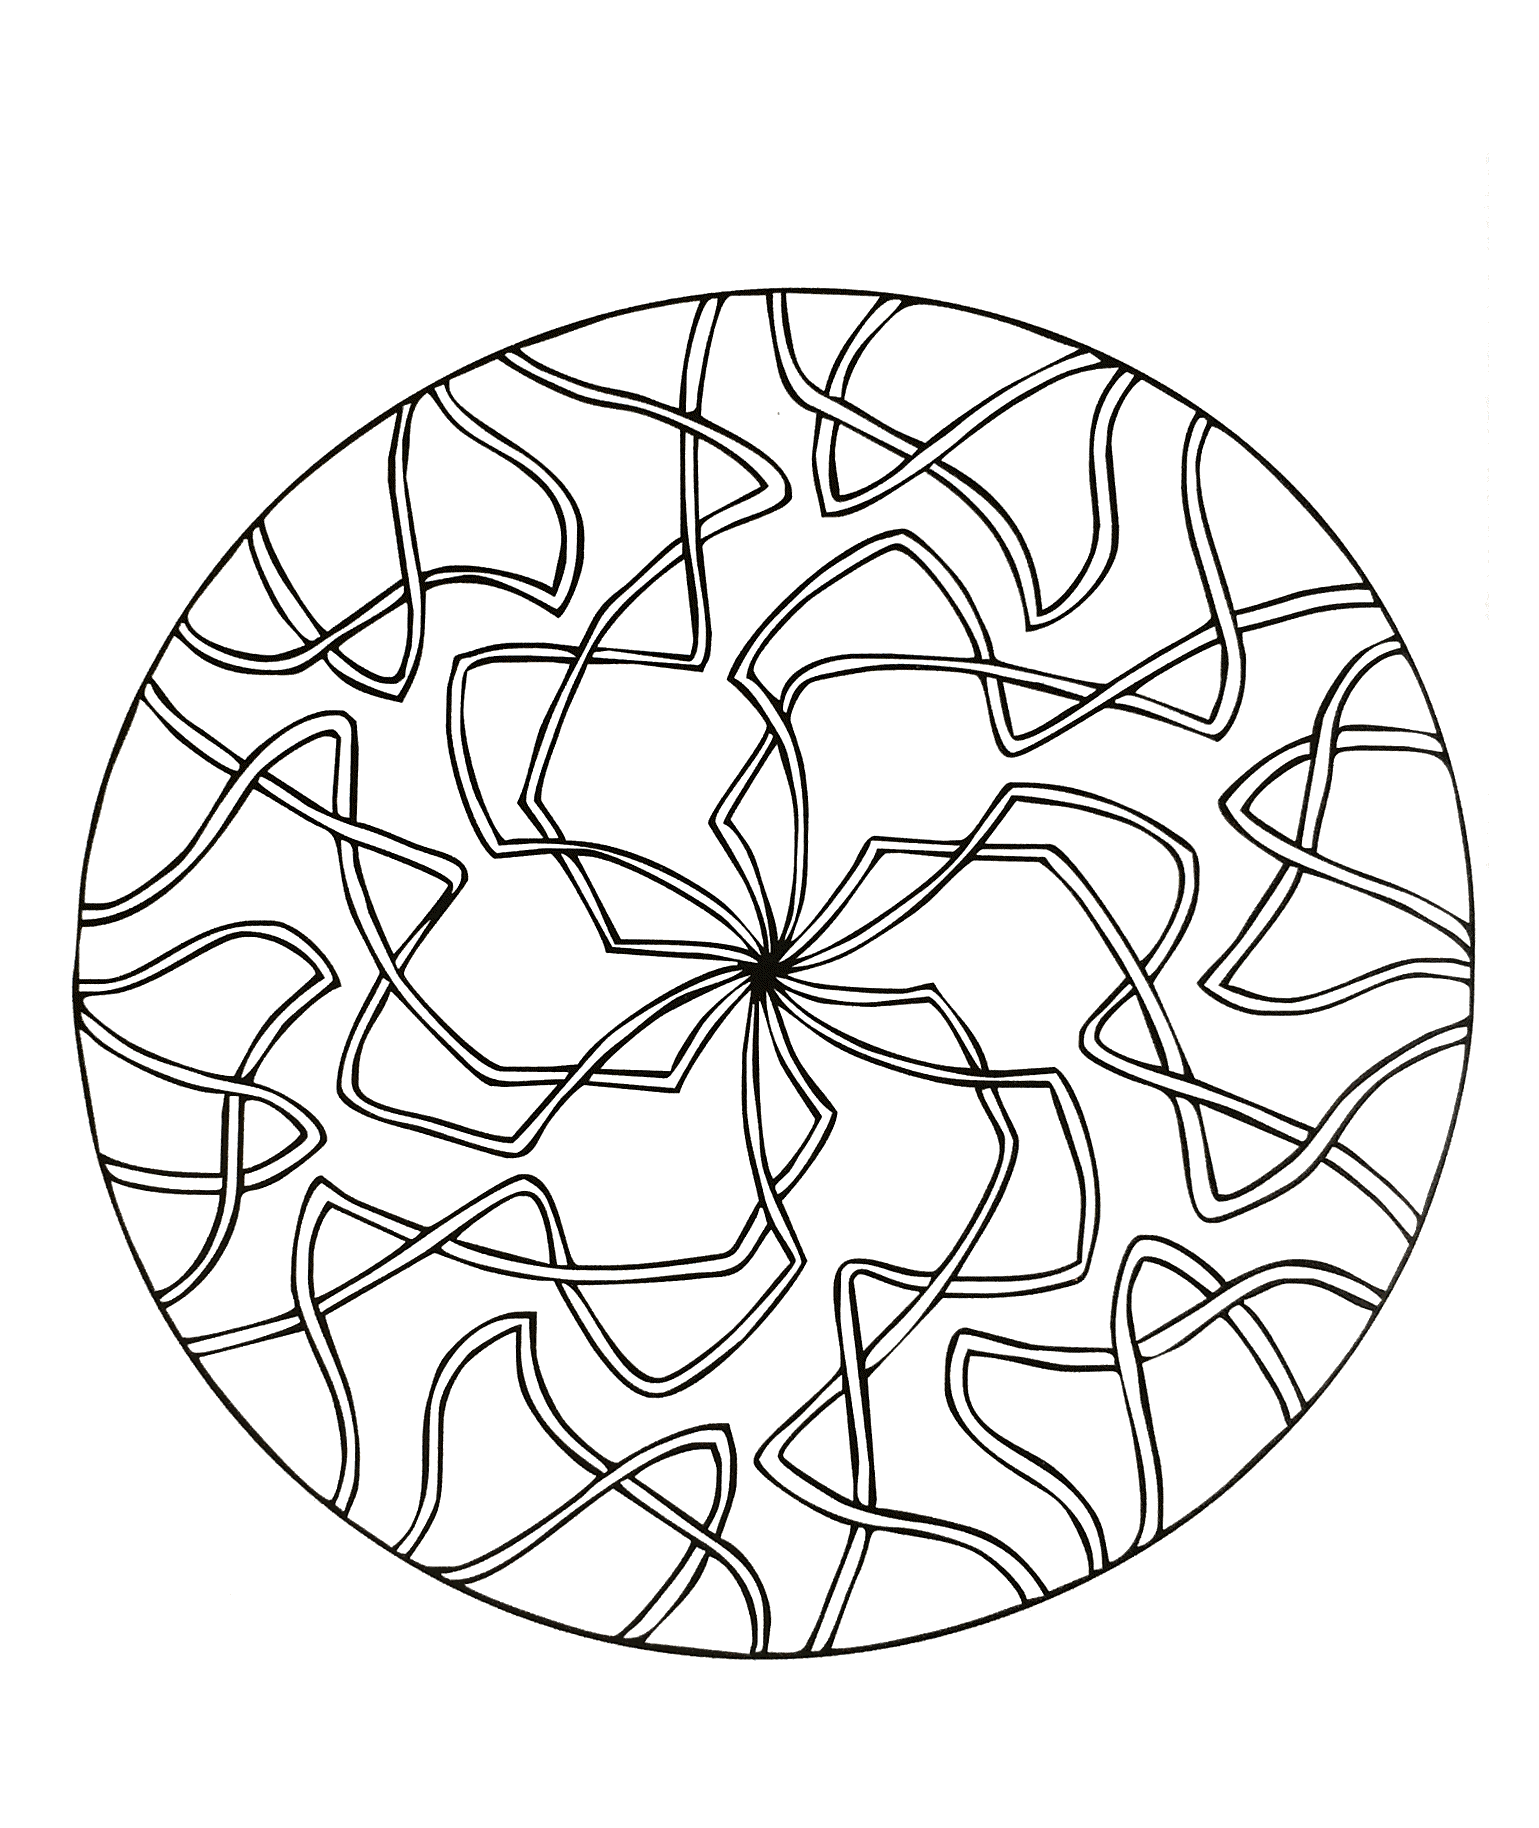 A Mandala coloring page easy to color, perfect for kids, with big areas to color. Children can color the shapes and figures anyway they like. It also gives your kids a sense of accomplishment when he finishes coloring a page.